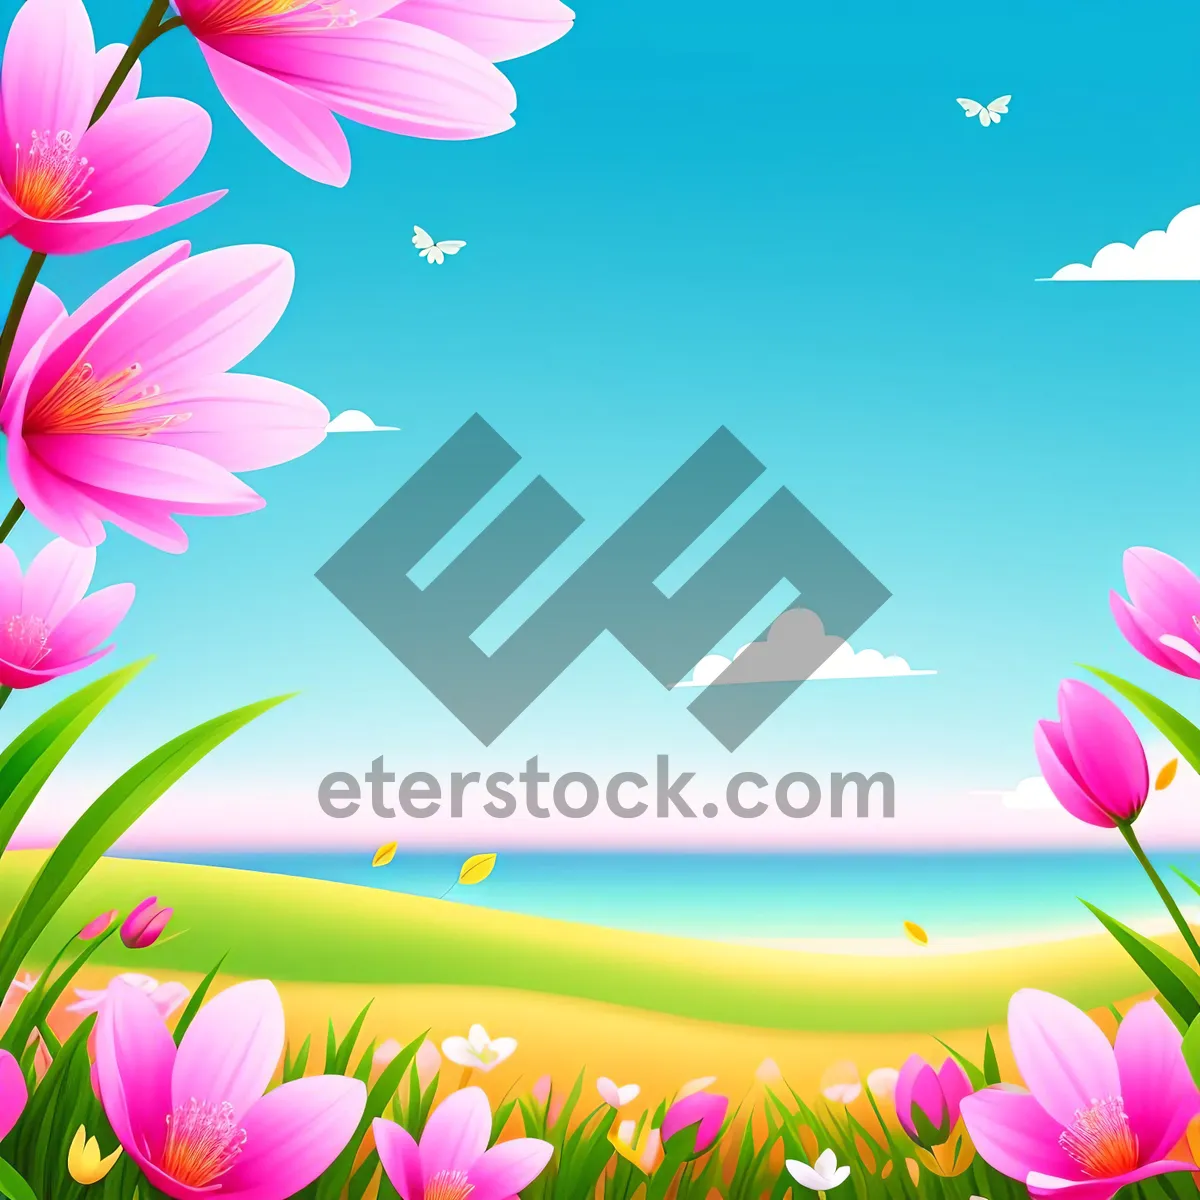 Picture of Colorful Floral Spring Tulip Design